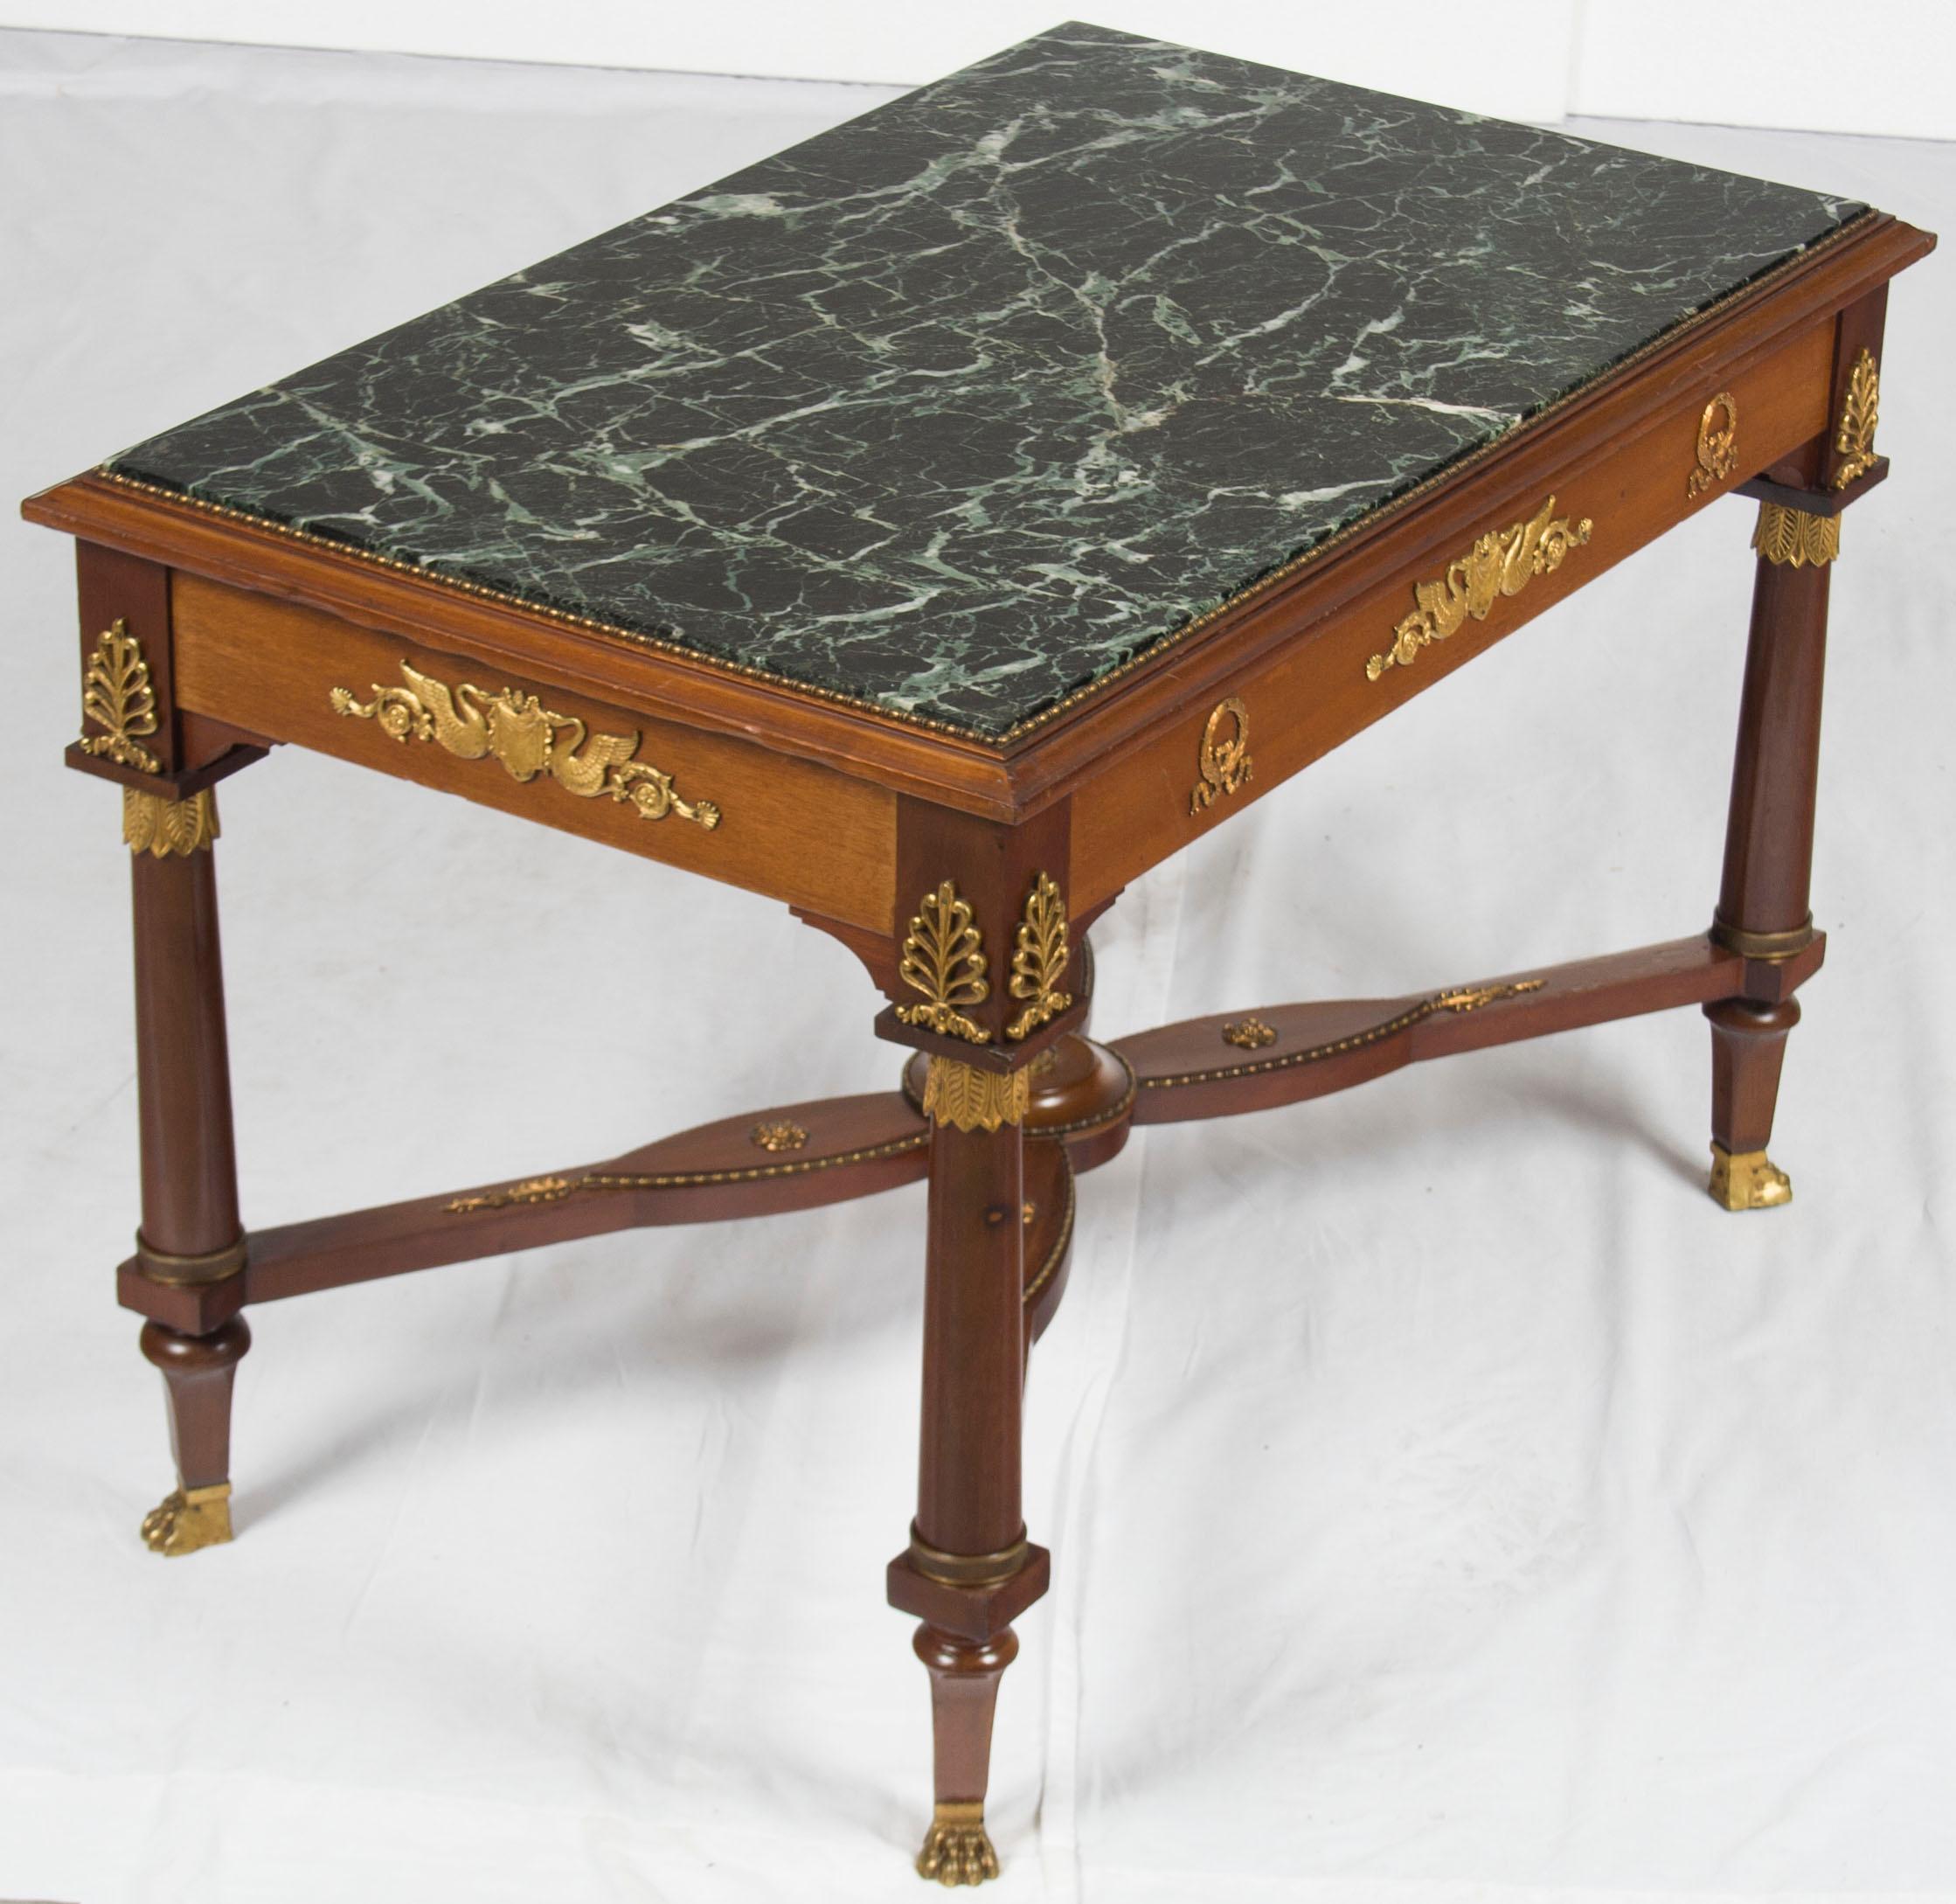 Done in a French Empire style, this antique marble top coffee table makes a central statement for your room! An inset highly figured green marble contrasts perfectly with the mahogany wood and brass accents. A great size for any home!

In keeping